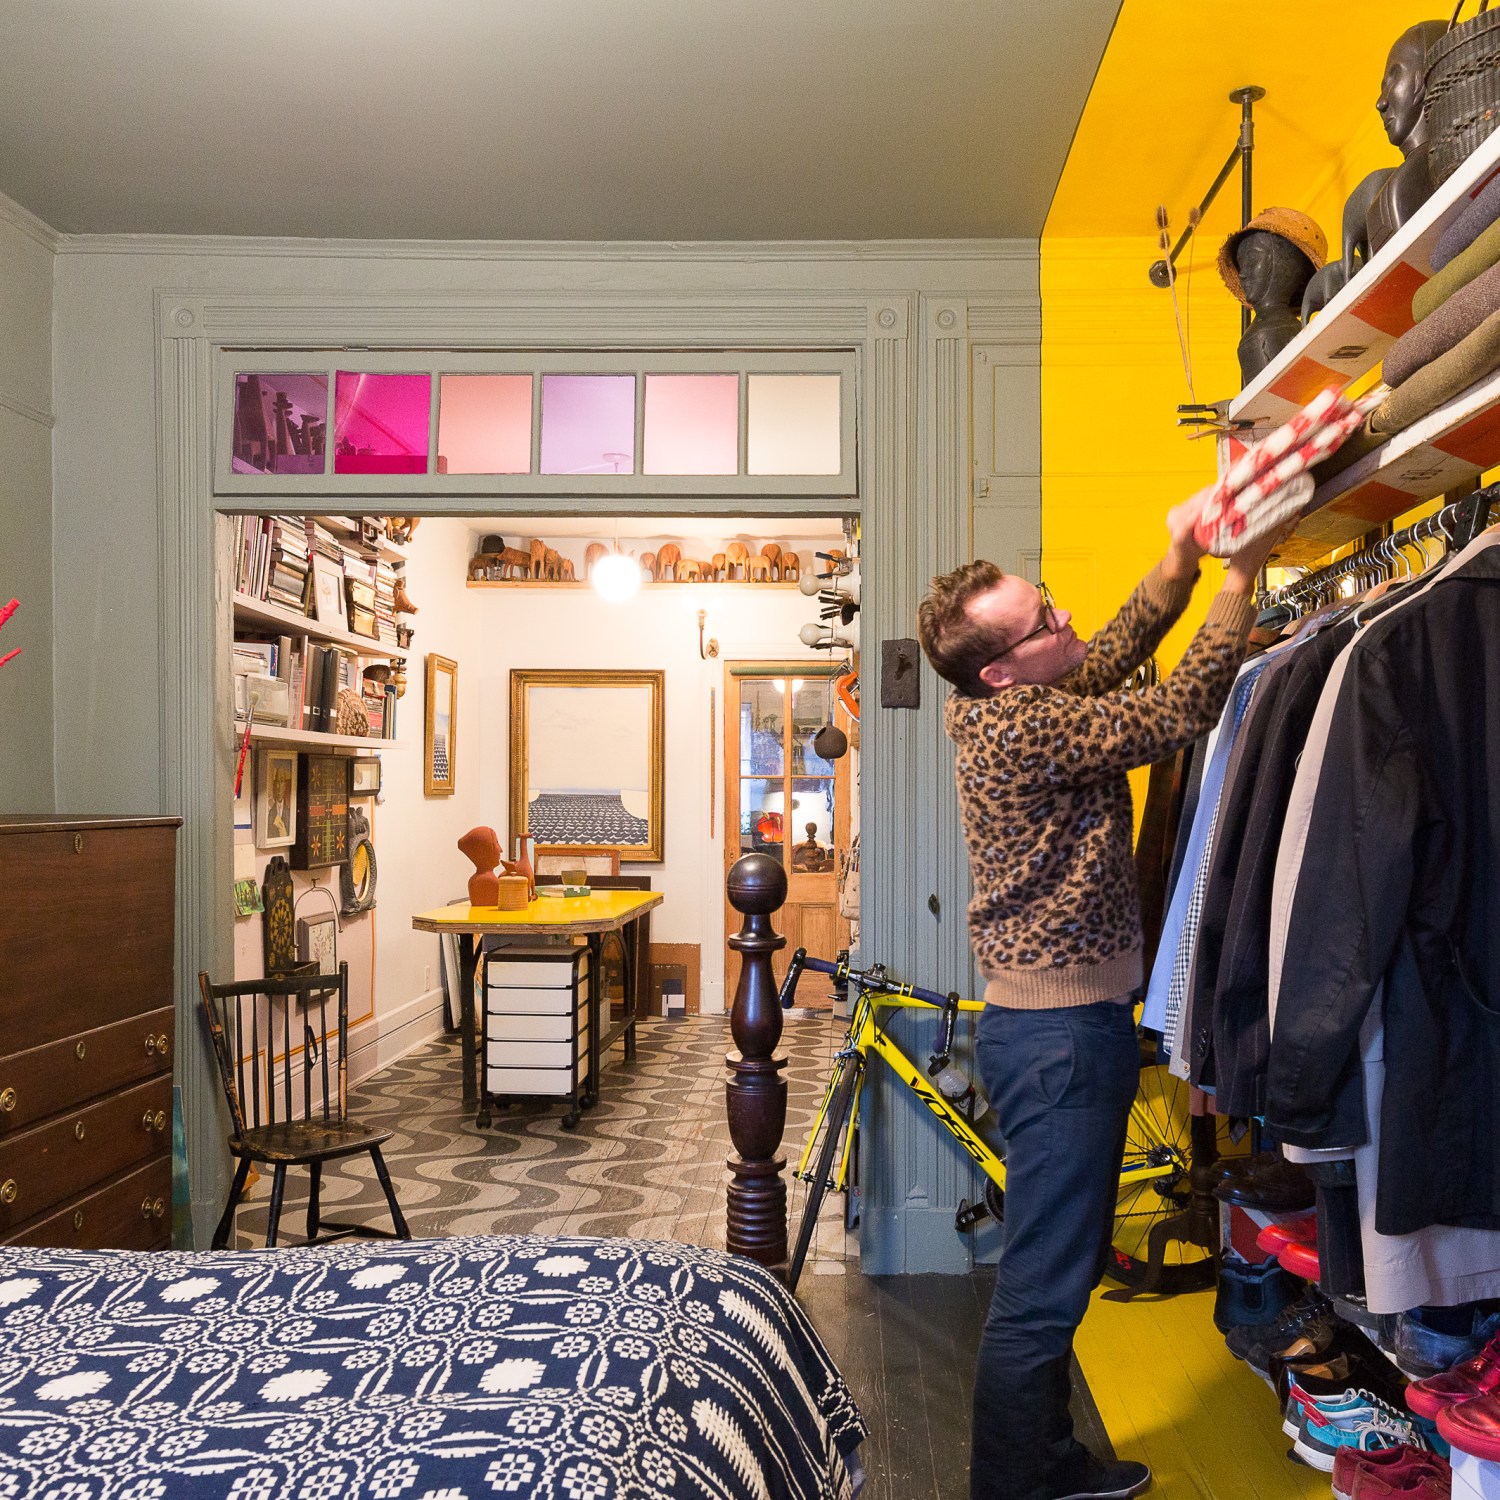 Hanging rack for clothes in NYC apartment